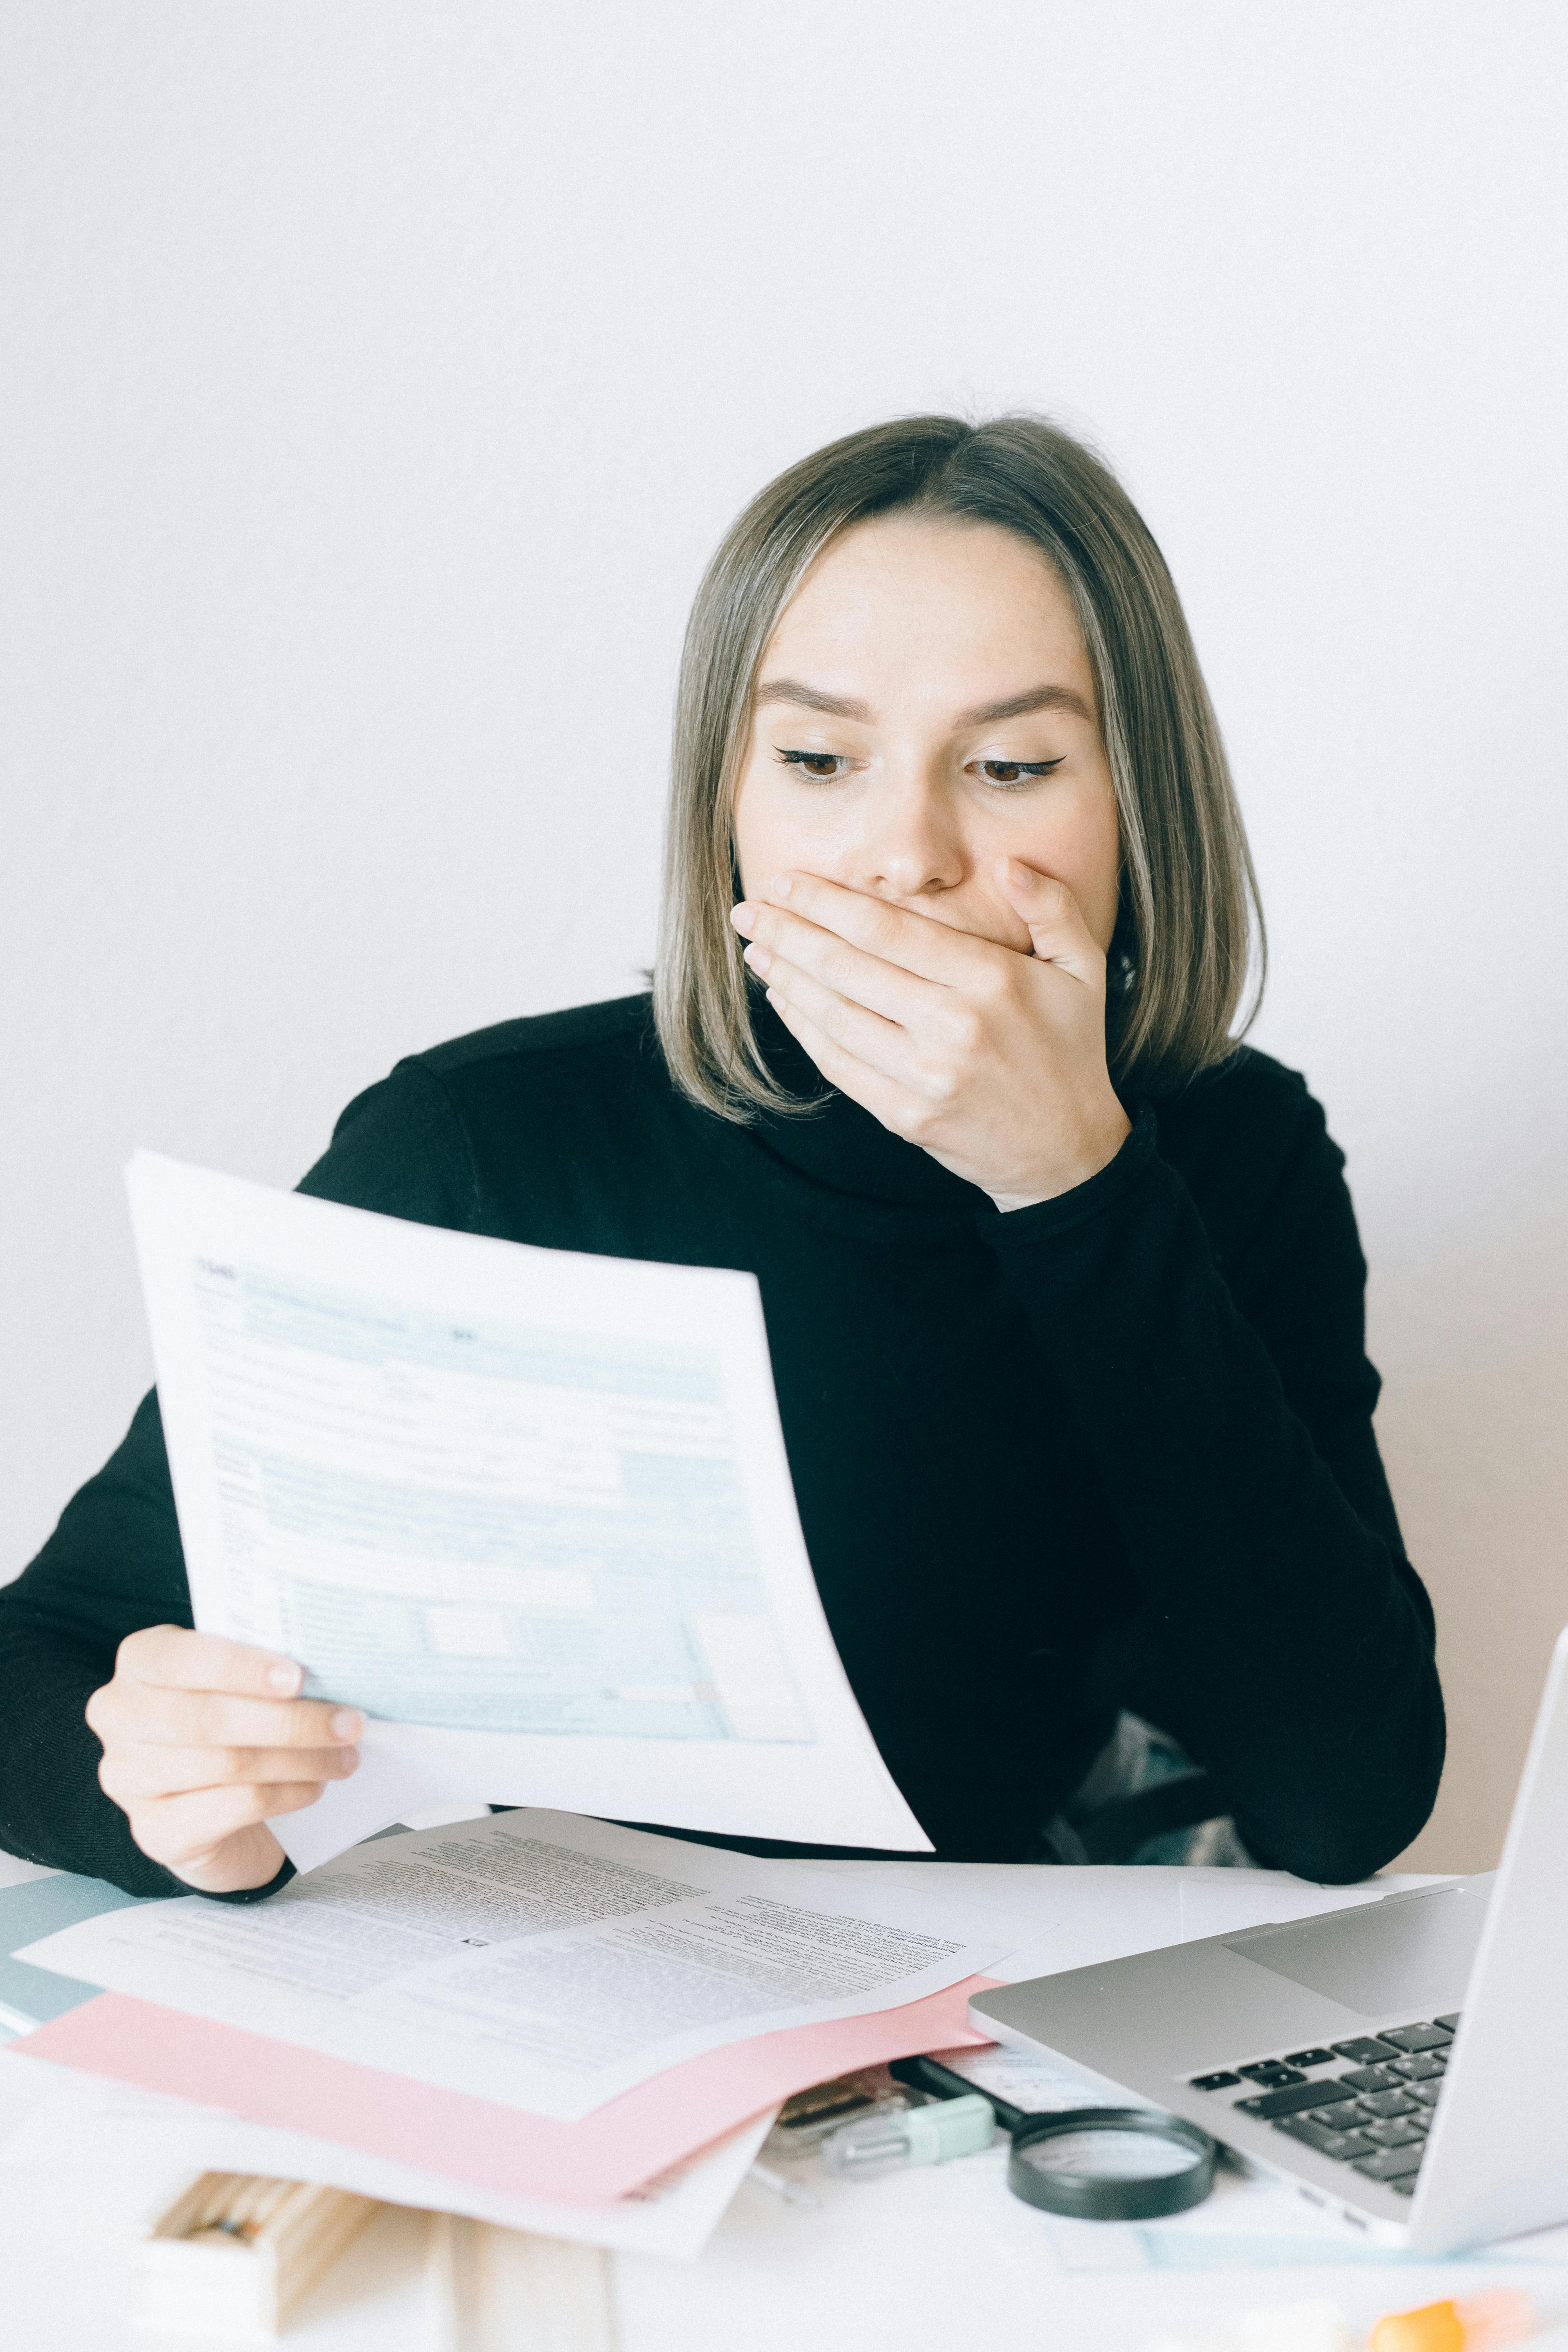 Woman looks at the documents | Source: Pexels